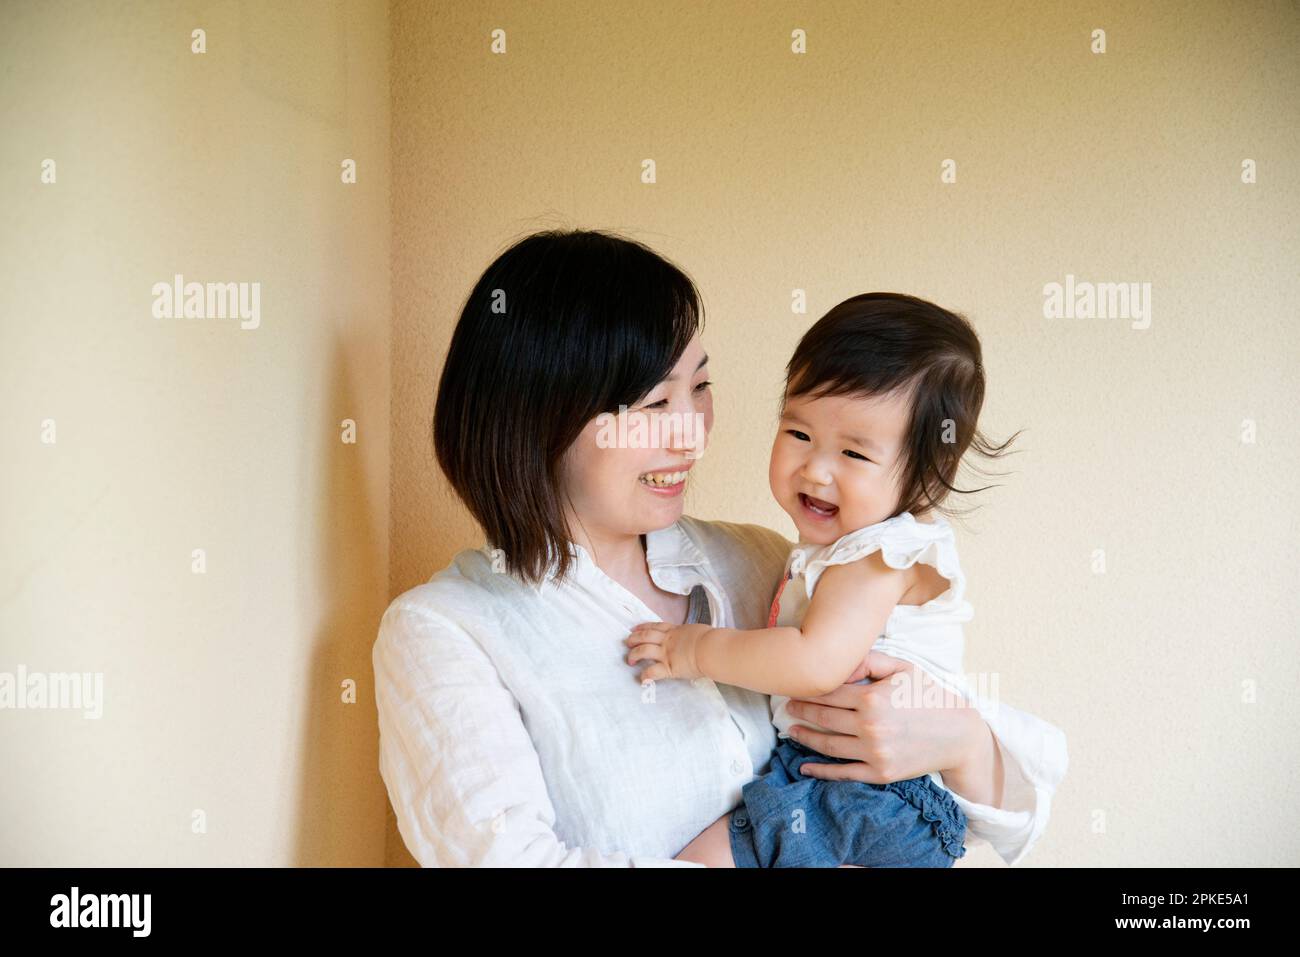 Laughing parent and child Stock Photo